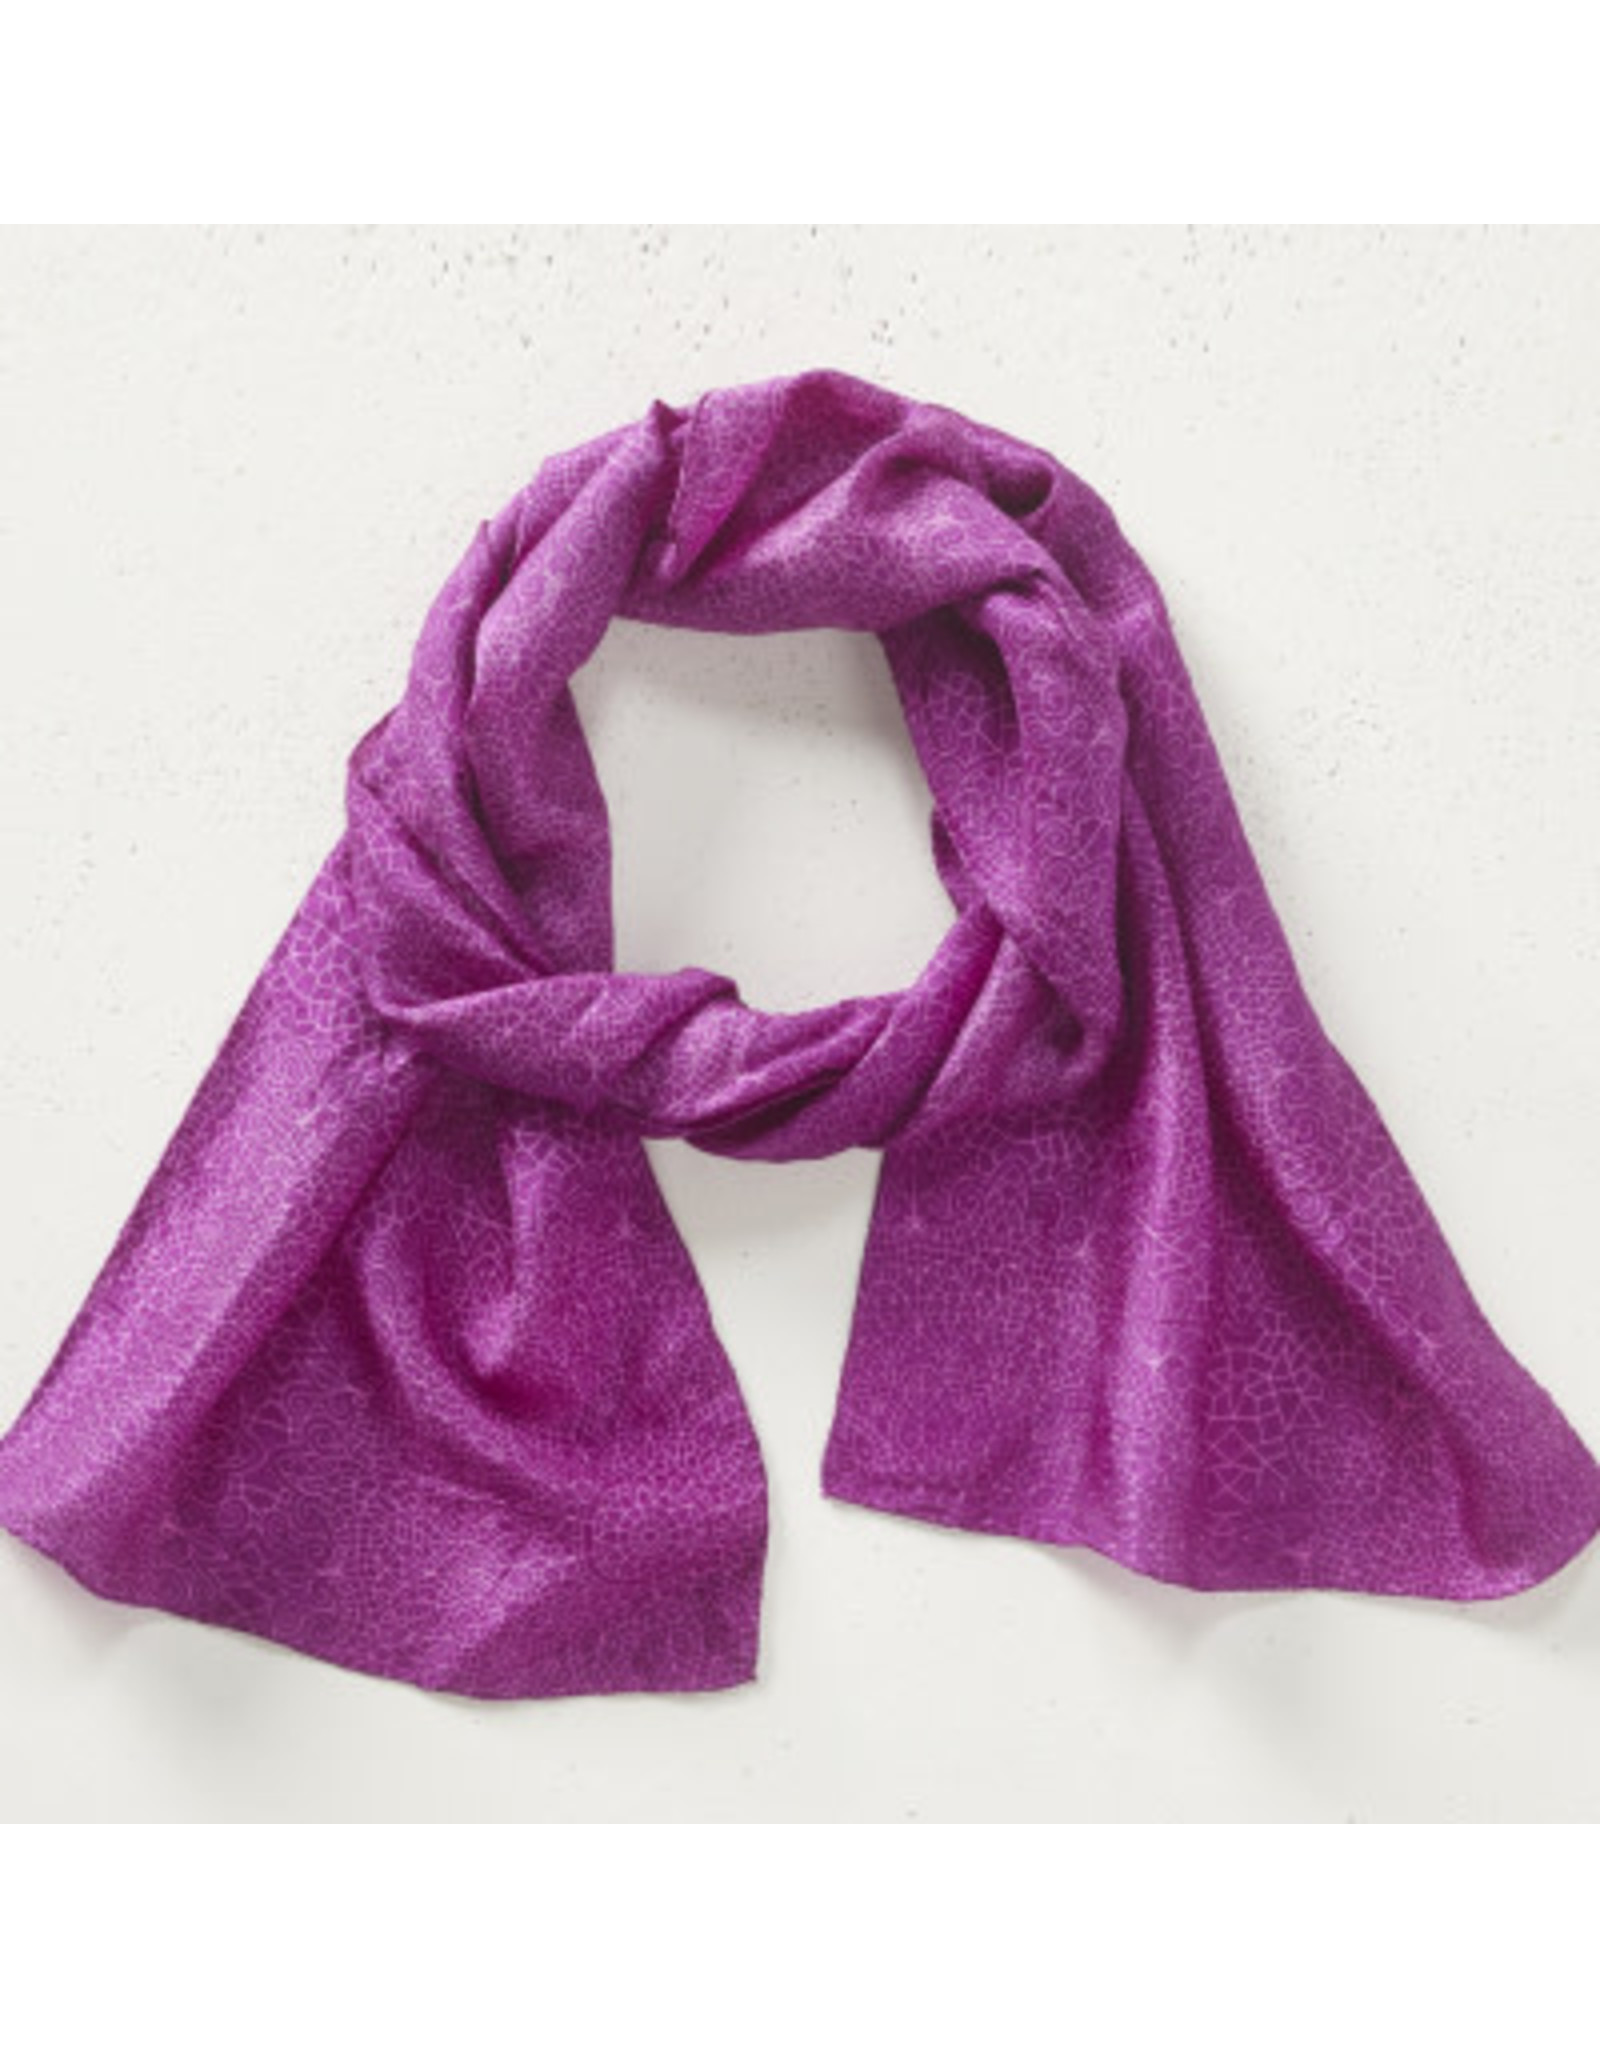 Trade roots Amethyst Silk Scarf, India